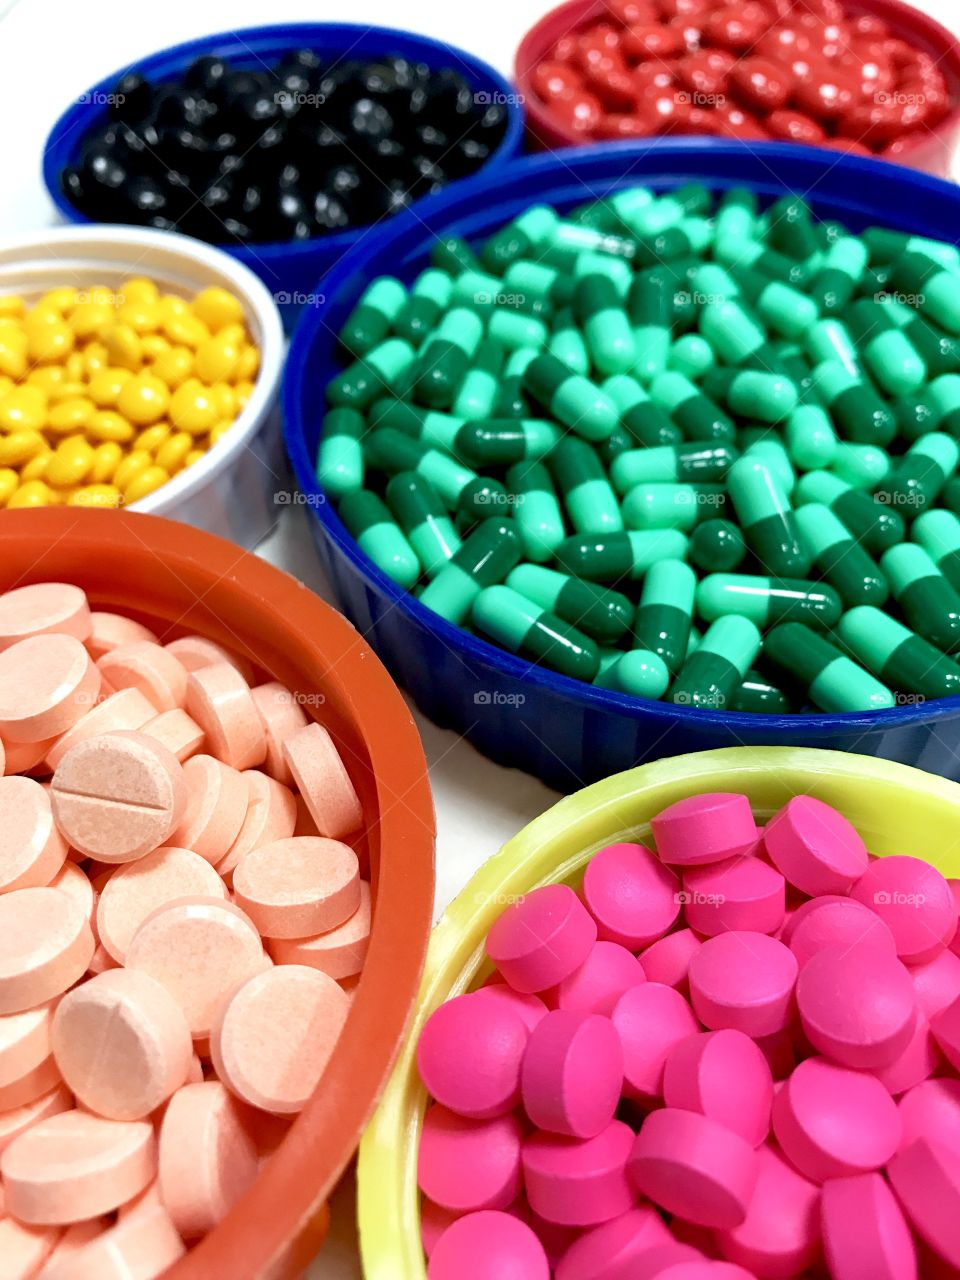 Colourful of drugs.